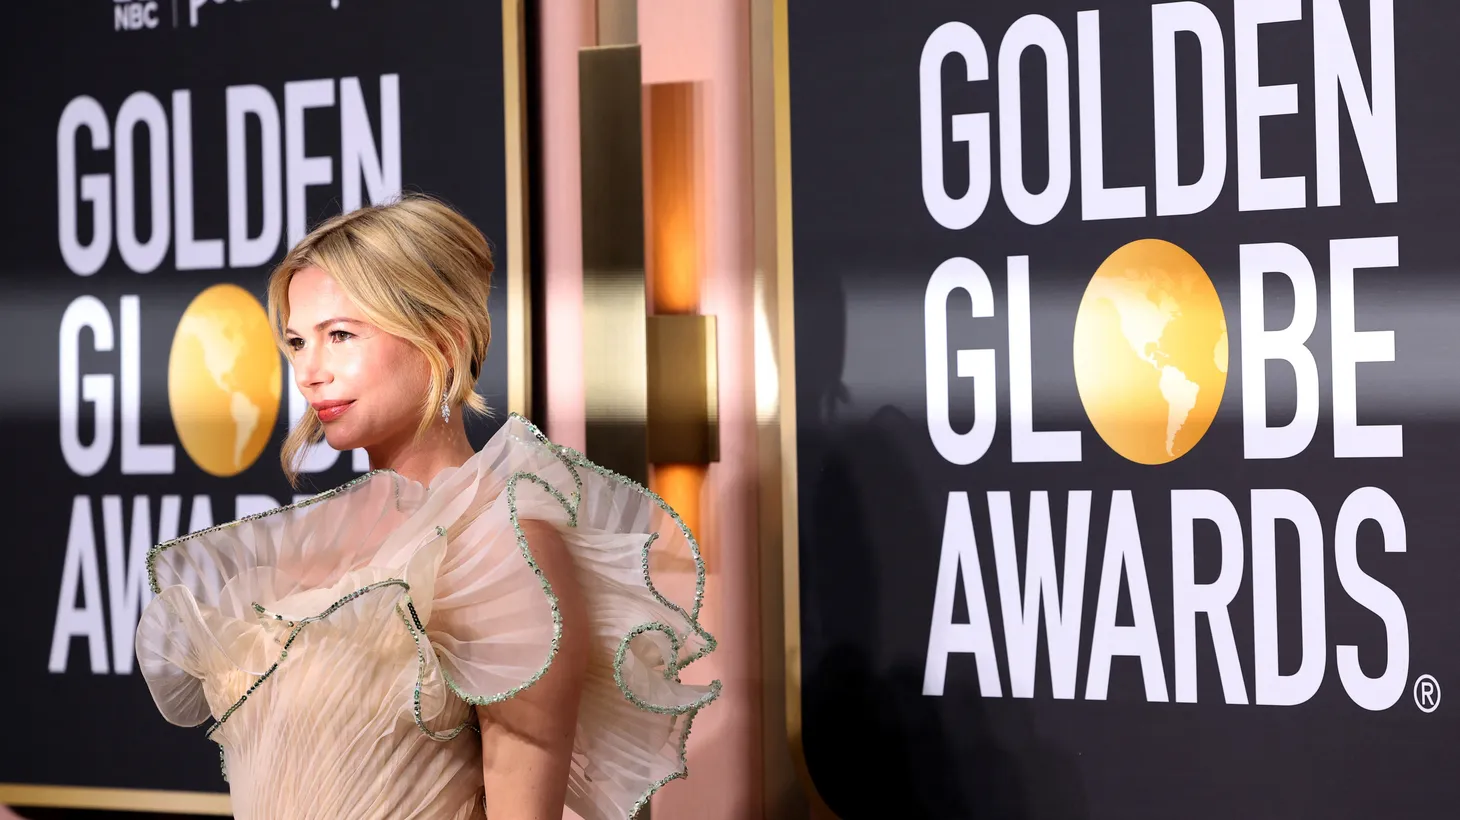 Michelle Williams attends the 80th Annual Golden Globe Awards in Beverly Hills, California, on January 10, 2023.